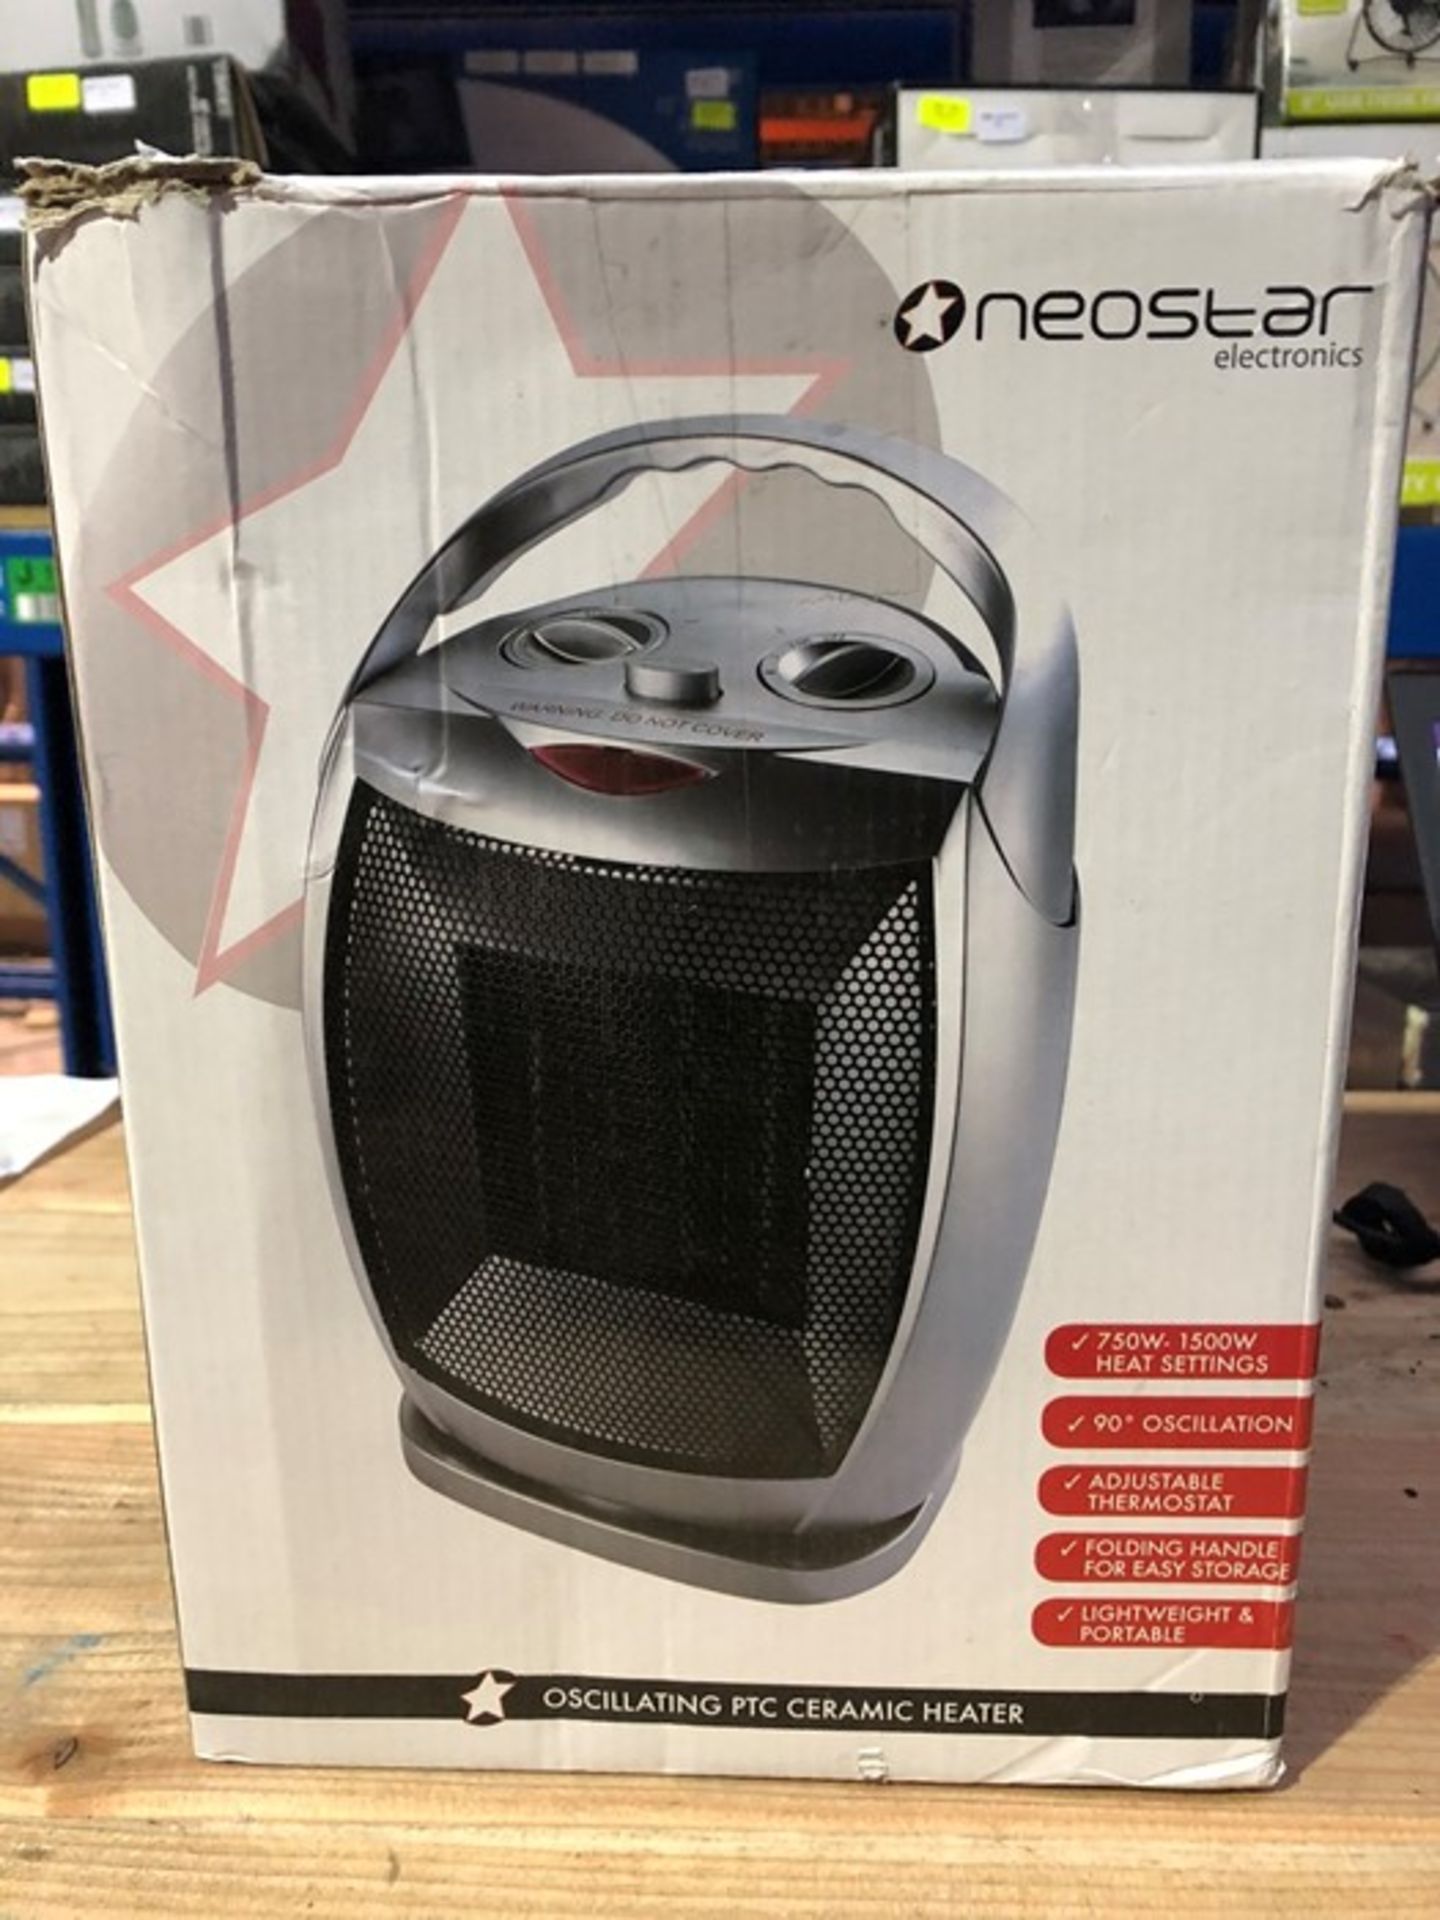 1 BOXED NEOSTAR ELECTRONICS OSCILLATING PTC CERAMIC HEATER / RRP £24.99 (PUBLIC VIEWING AVAILABLE)